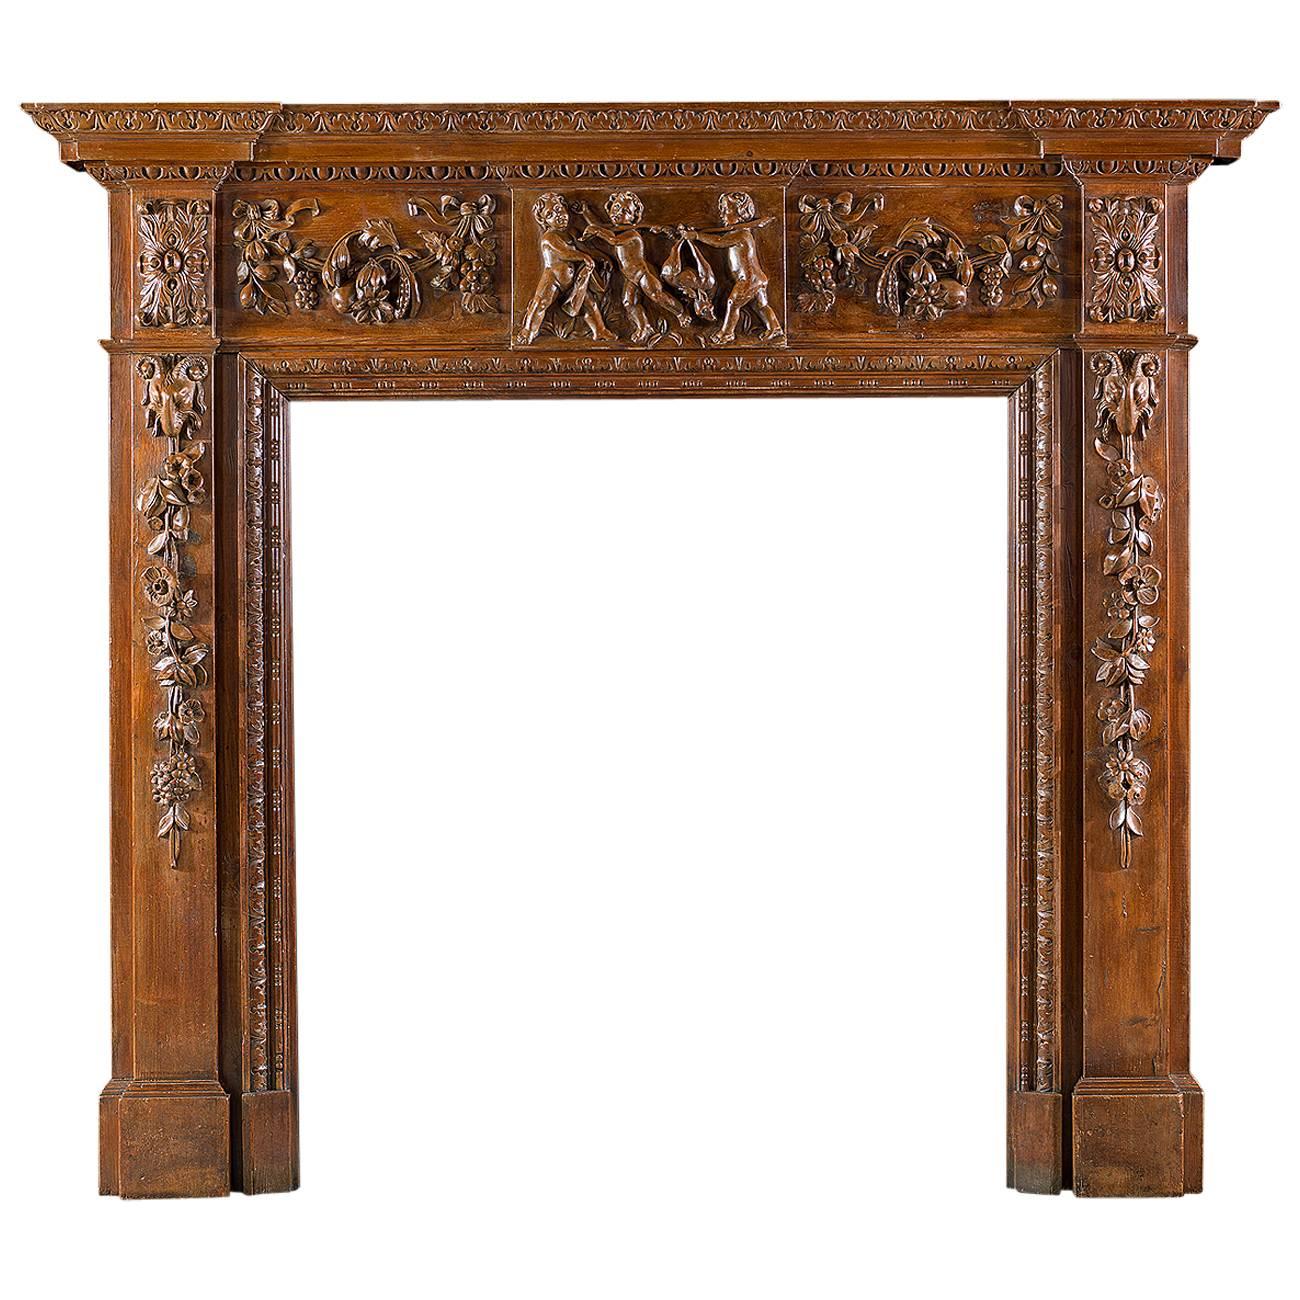 George III Style Carved Pine Antique Fireplace Mantel